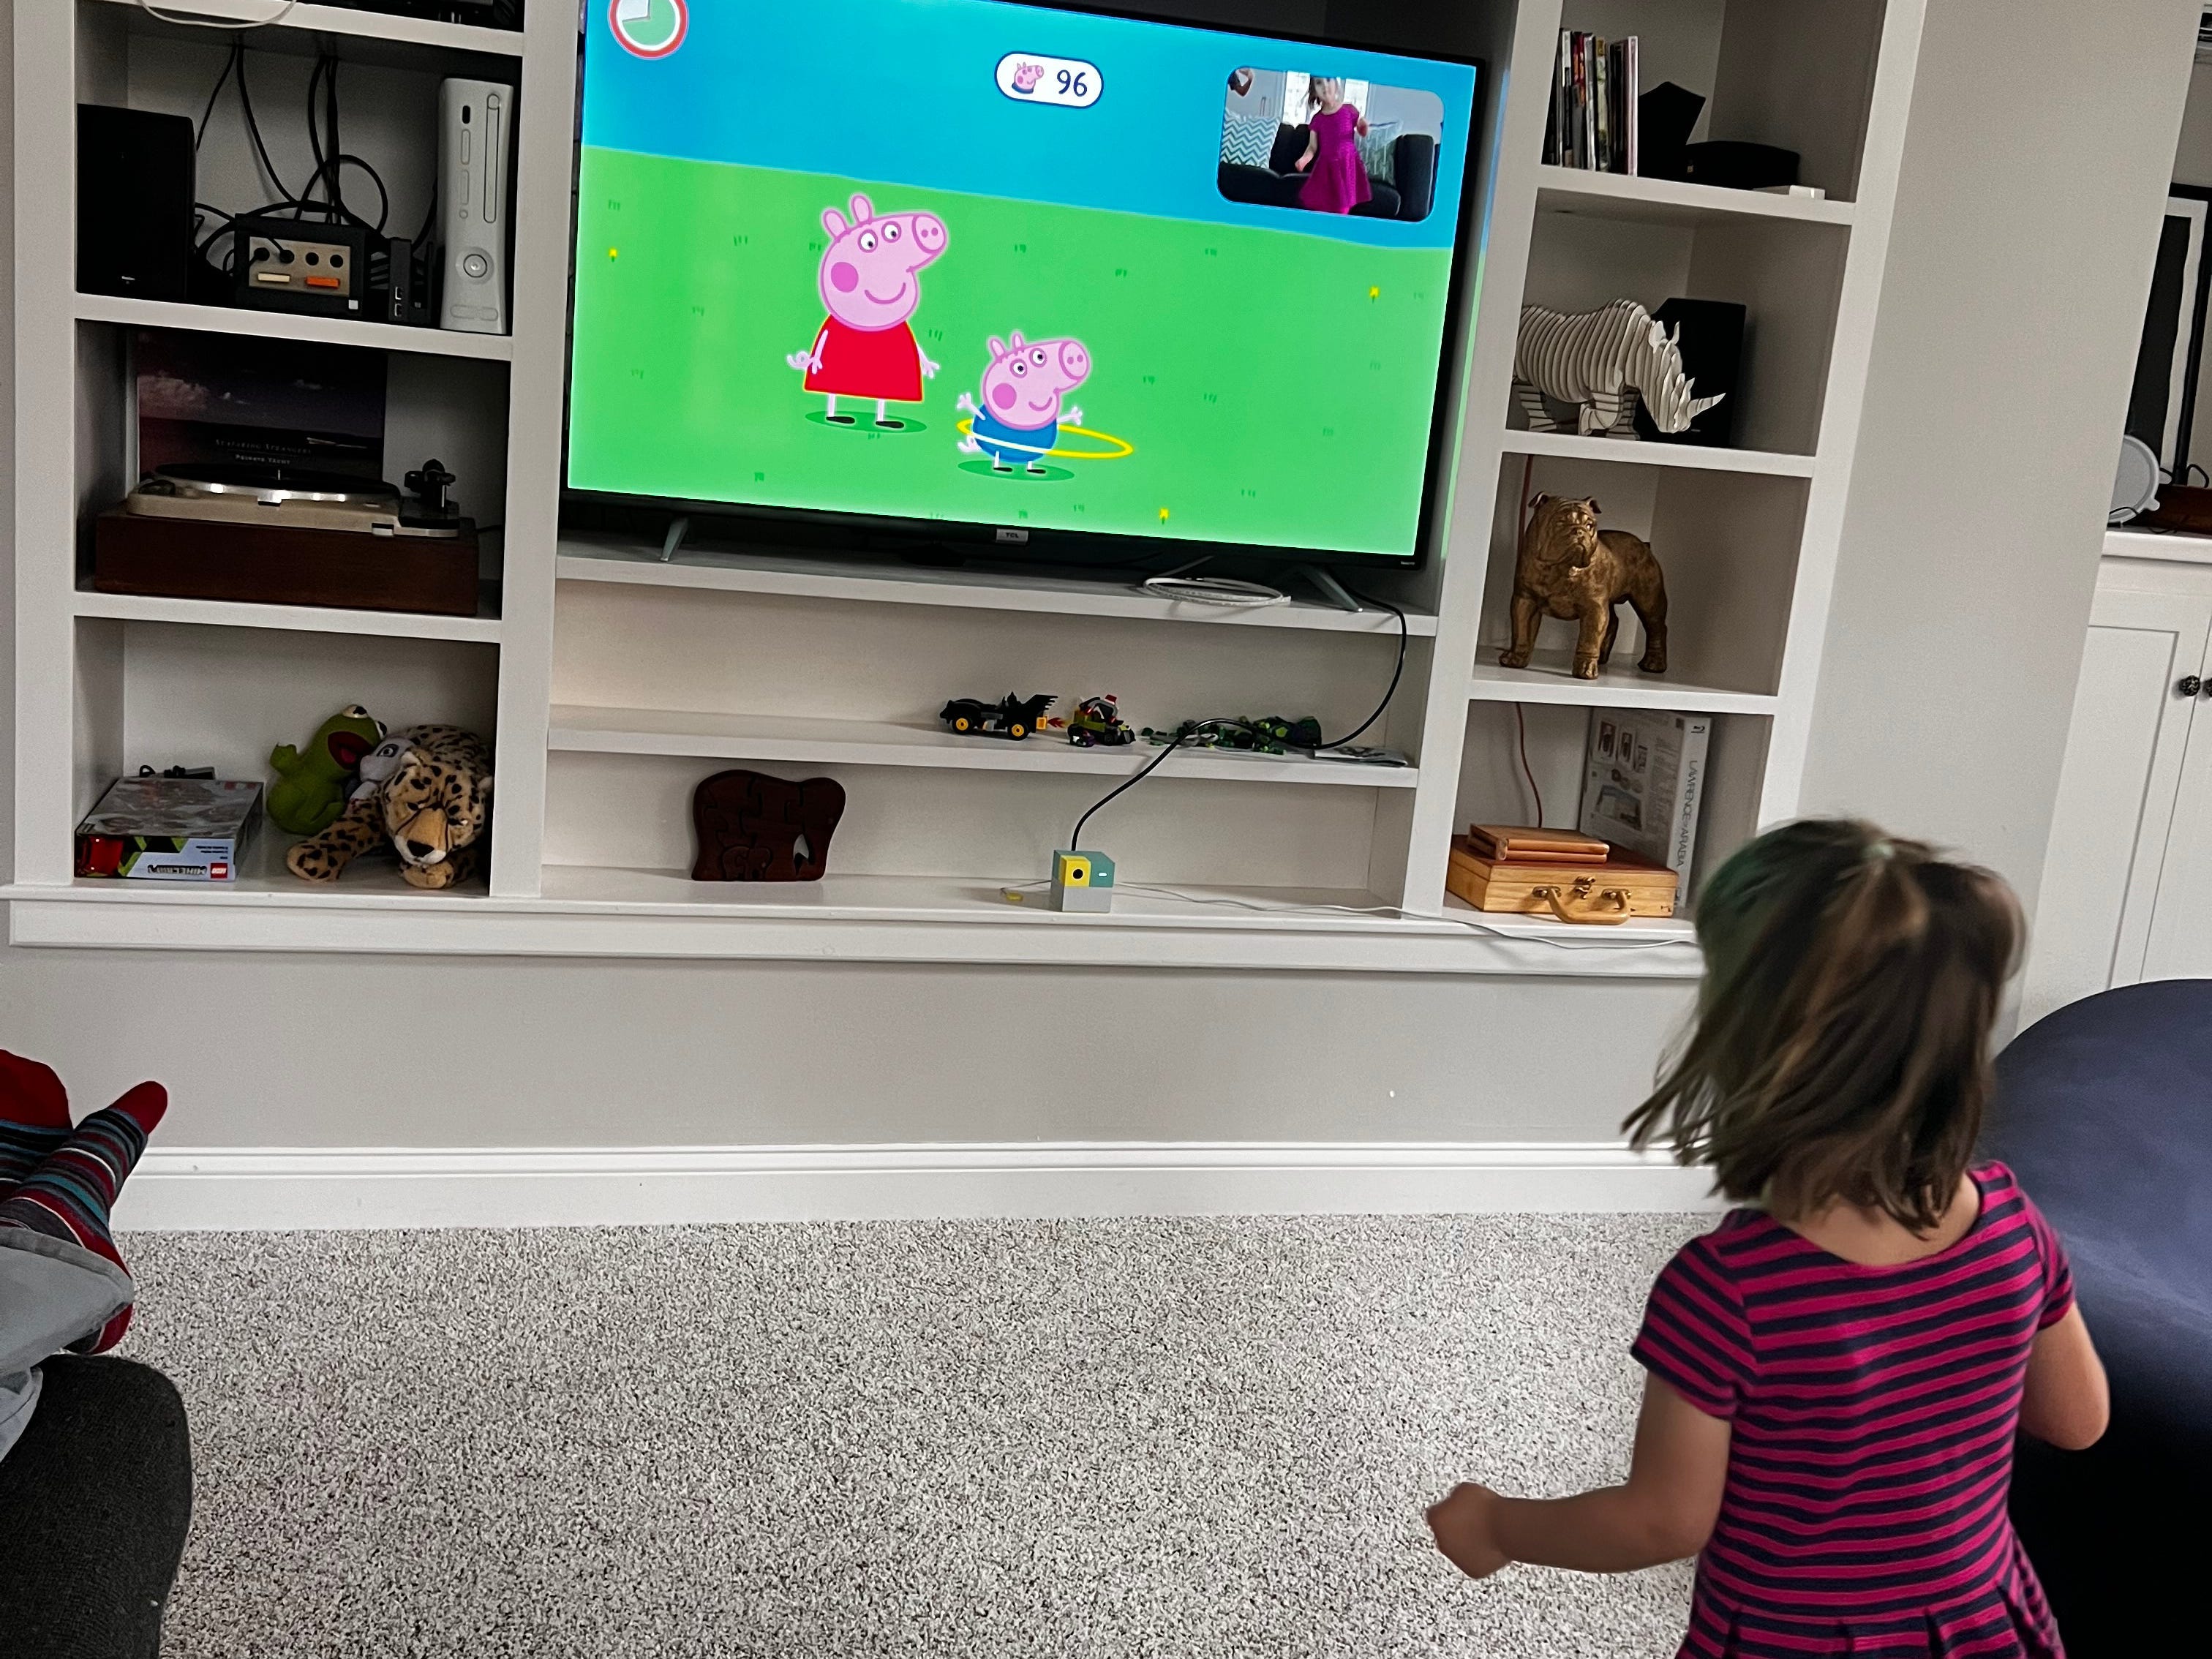 I was skeptical about introducing video games to my 3 young kids. I found an option that keeps them moving while playing.